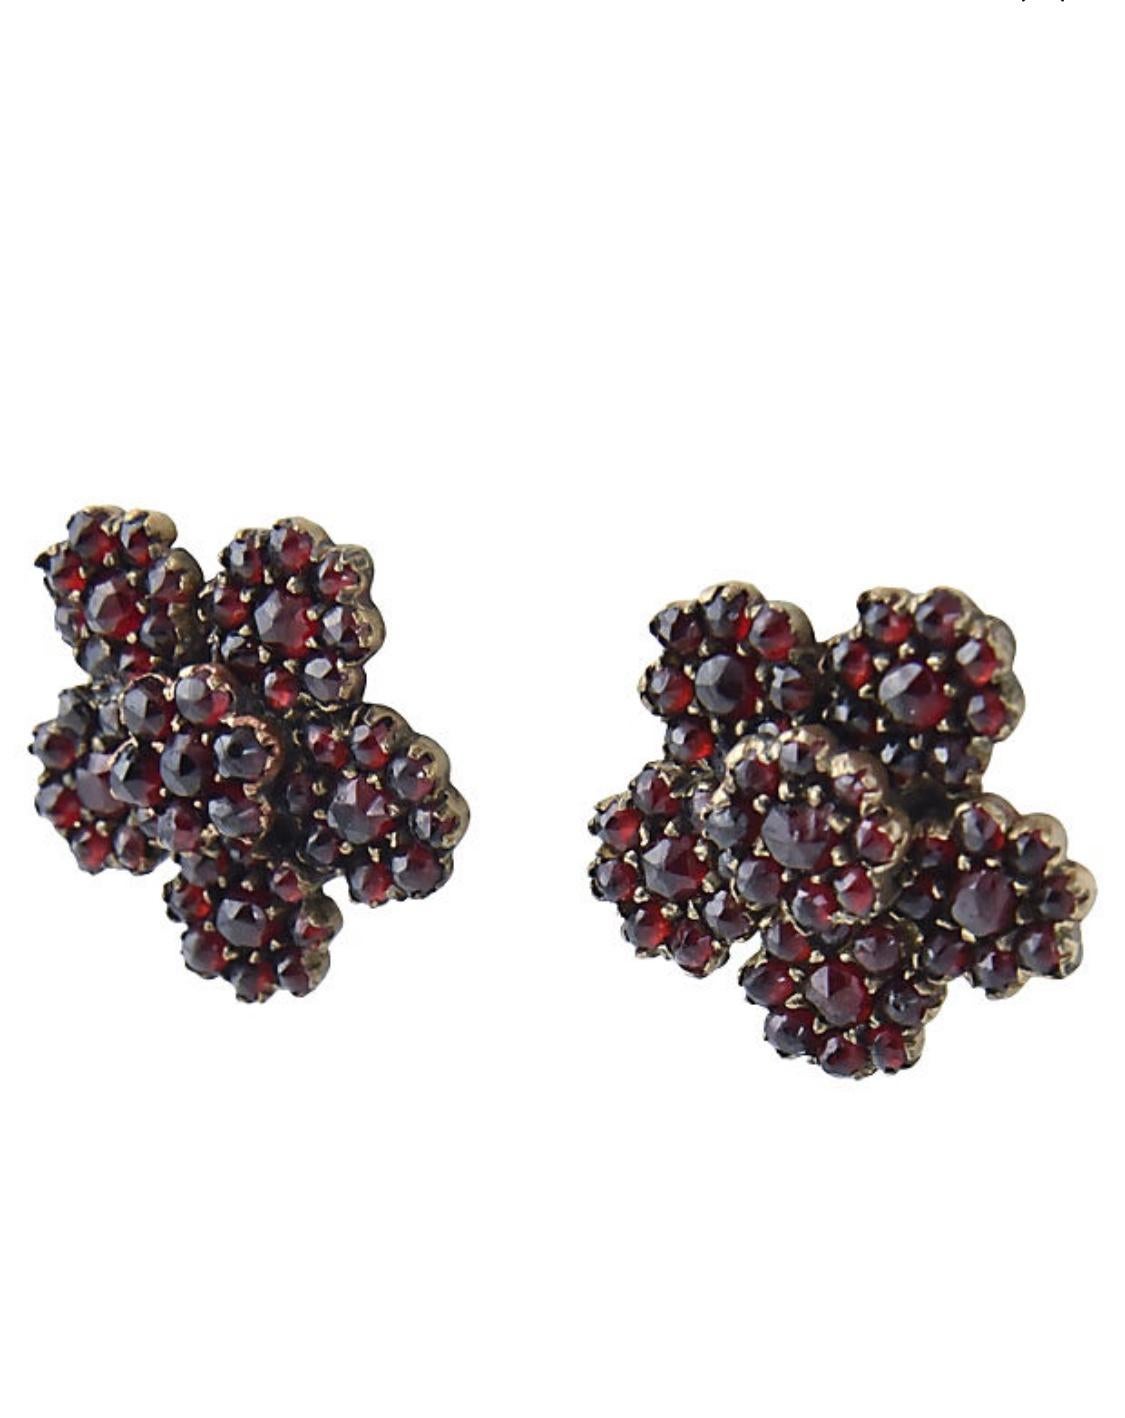 Victorian garnet and base metal flower earrings mounted on to 14k yellow gold posts.  They come with a pair of plastic wide backs to keep them nicely placed on the ear.